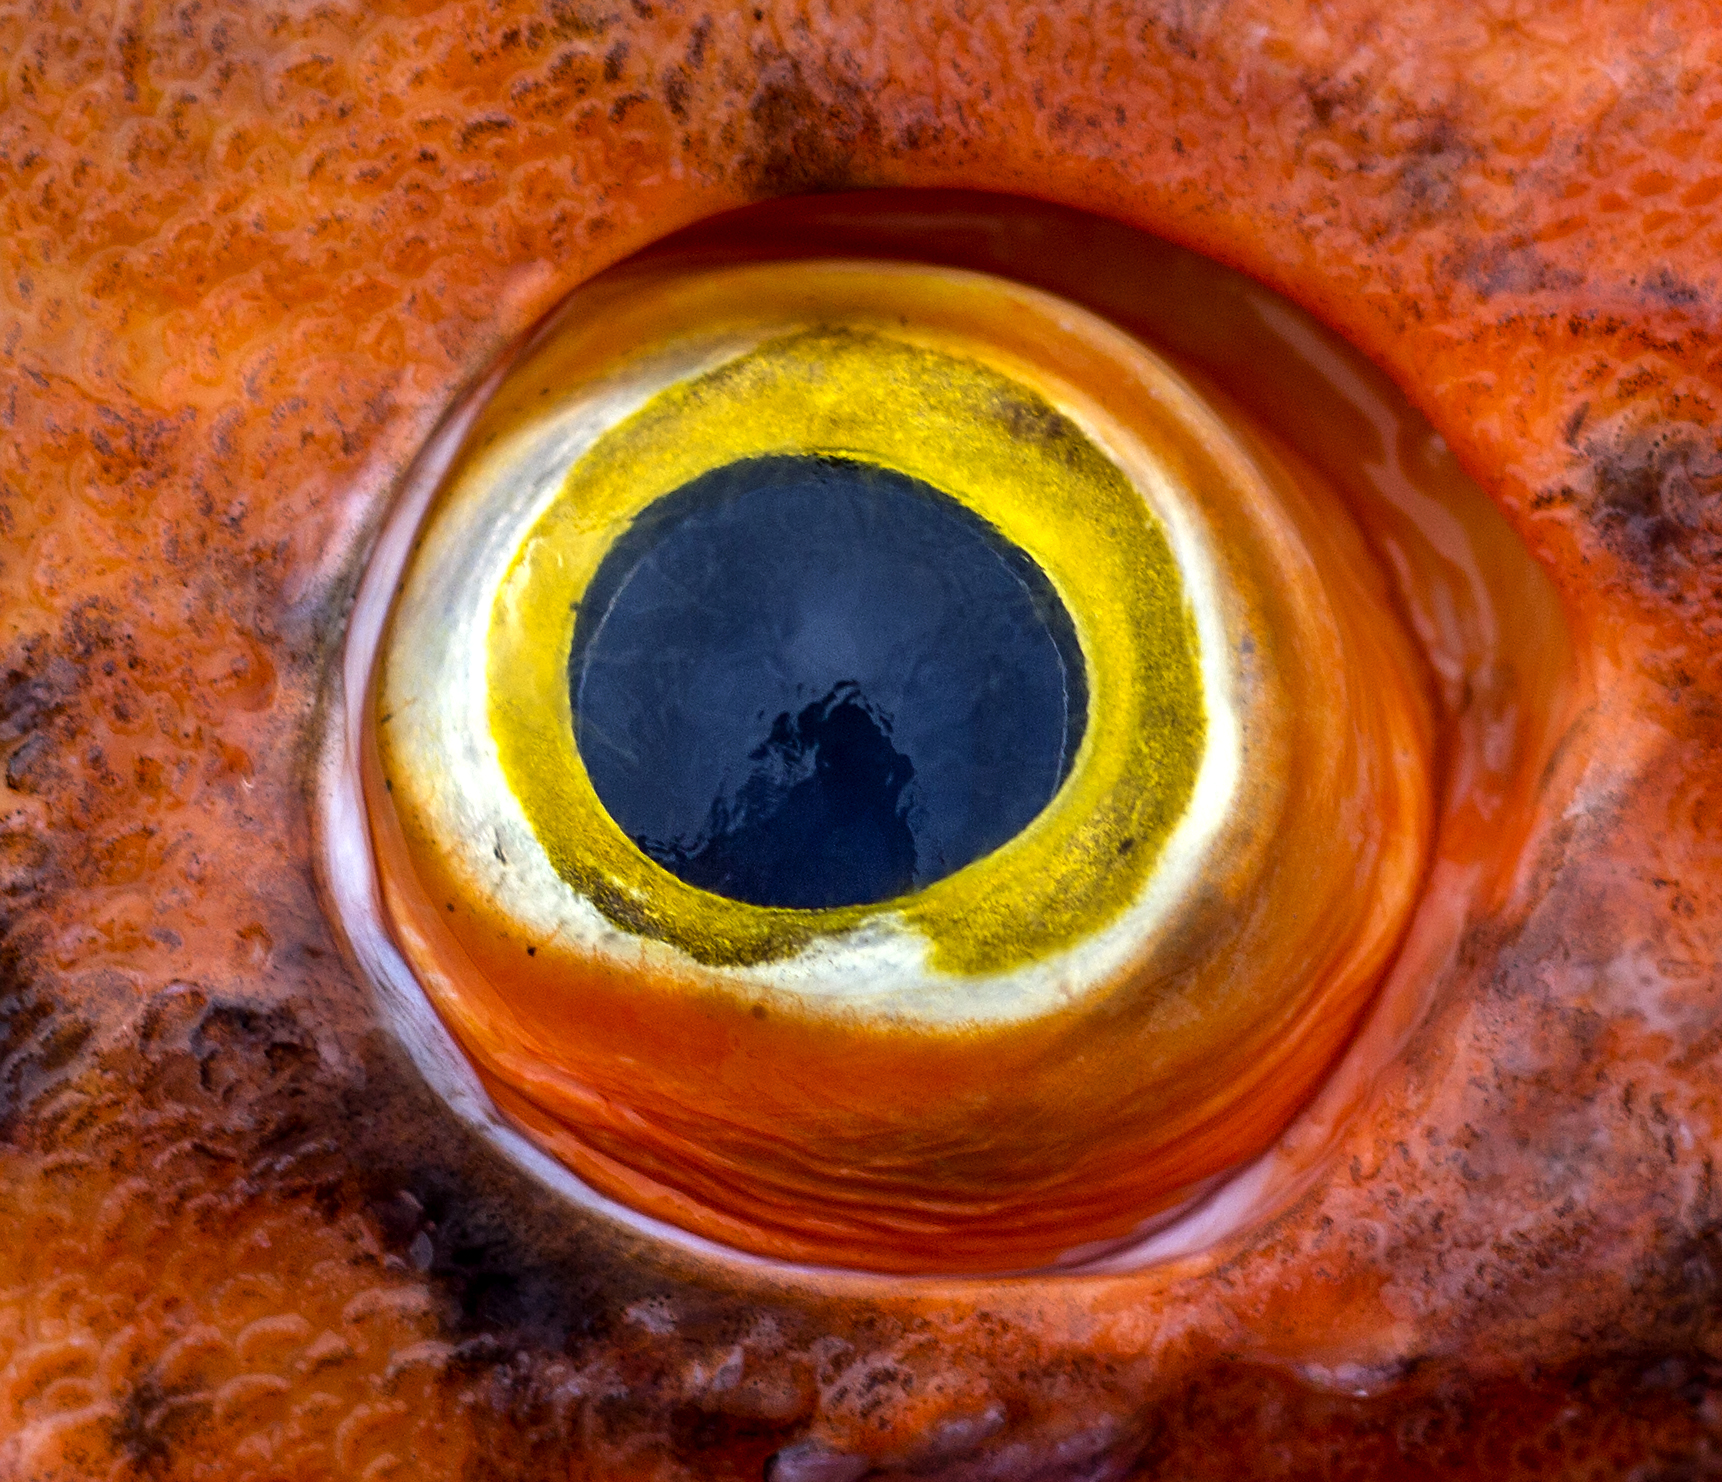  The eyes of a freshly caught yelloweye rockfish shine in sharp contrast to the fishes bright orange body. The yelloweye can live 114 to 120 years old, making it one of the worlds longest living fish species. As they grow, their color changes from re